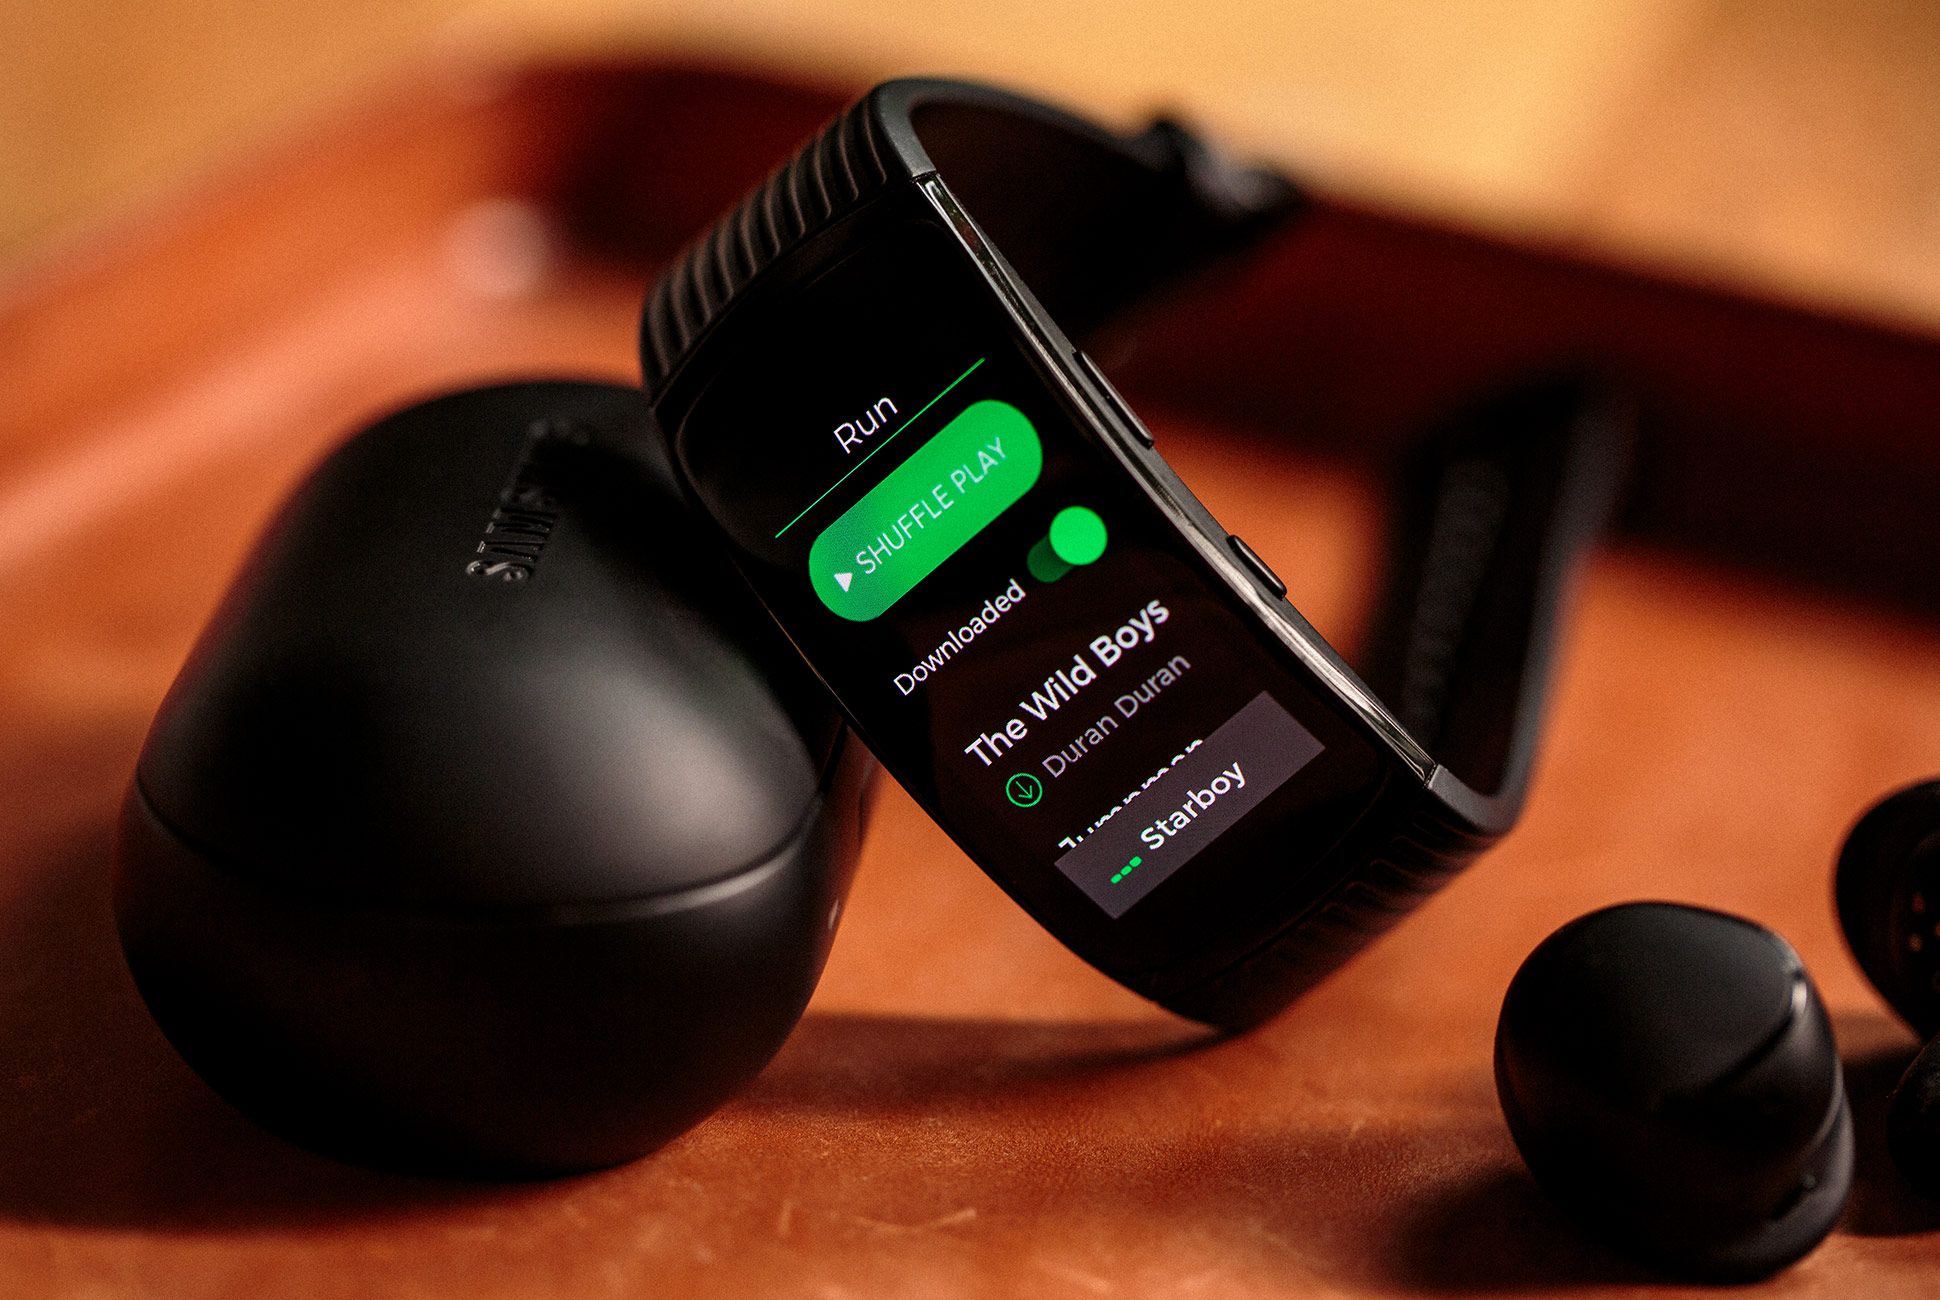 samsung gear fit manager pc app download